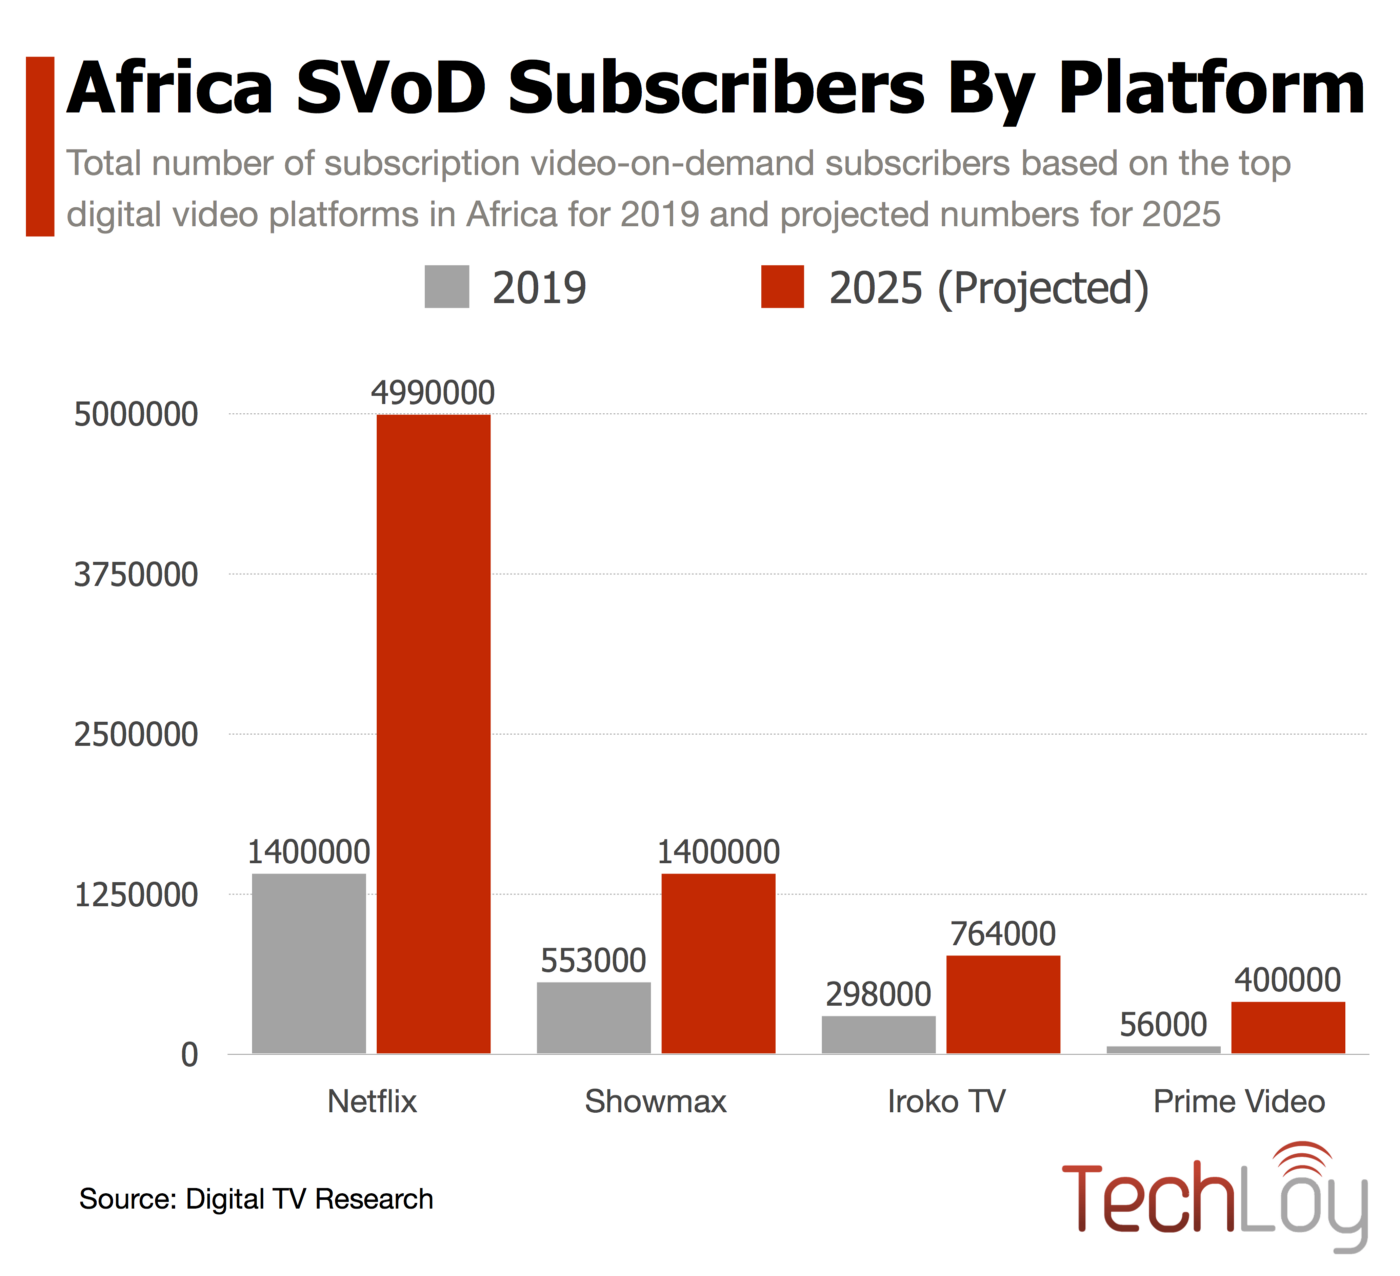 Netflixs domination of Africas Video-on-Demand (VoD) market to reach 2025, says report